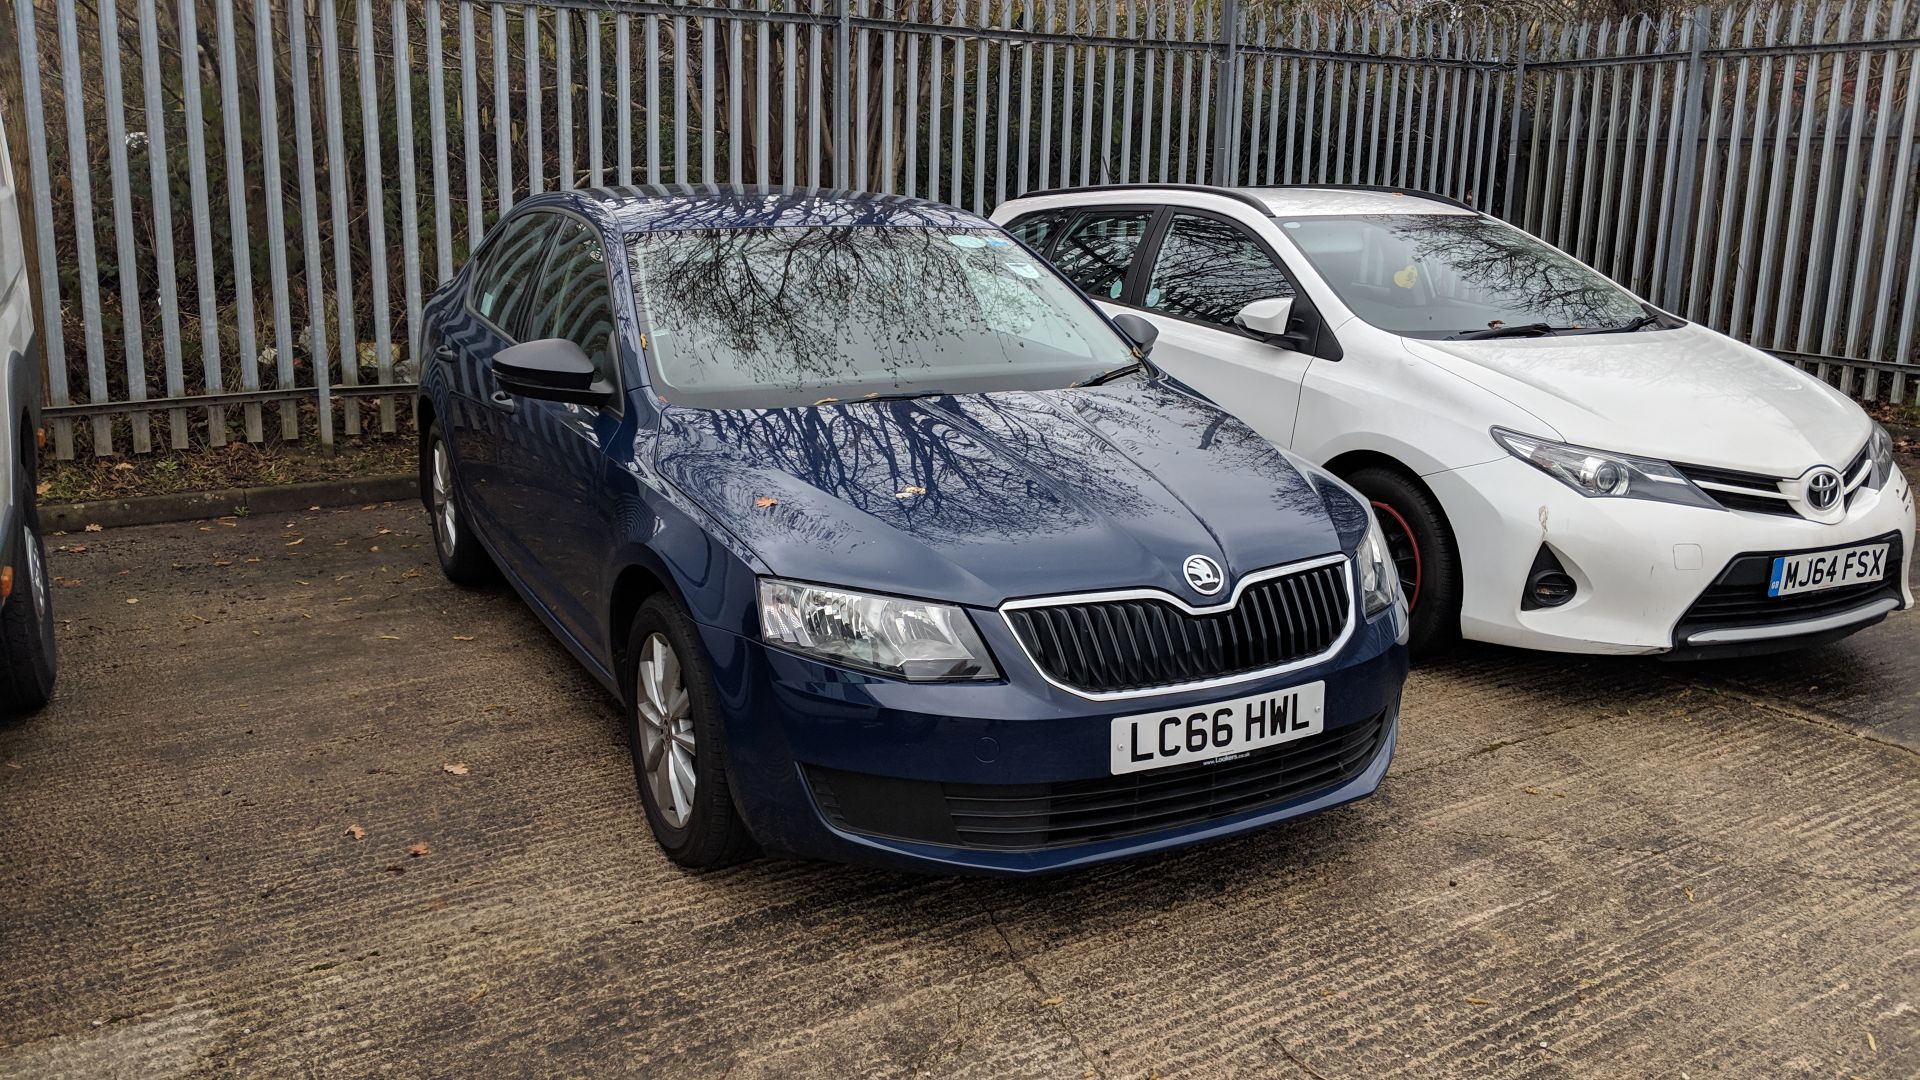 LC66 HWL Skoda Octavia S TDI S-A 1598cc diesel engine. Colour: Blue. First registered: 06.02.17. - Image 7 of 47